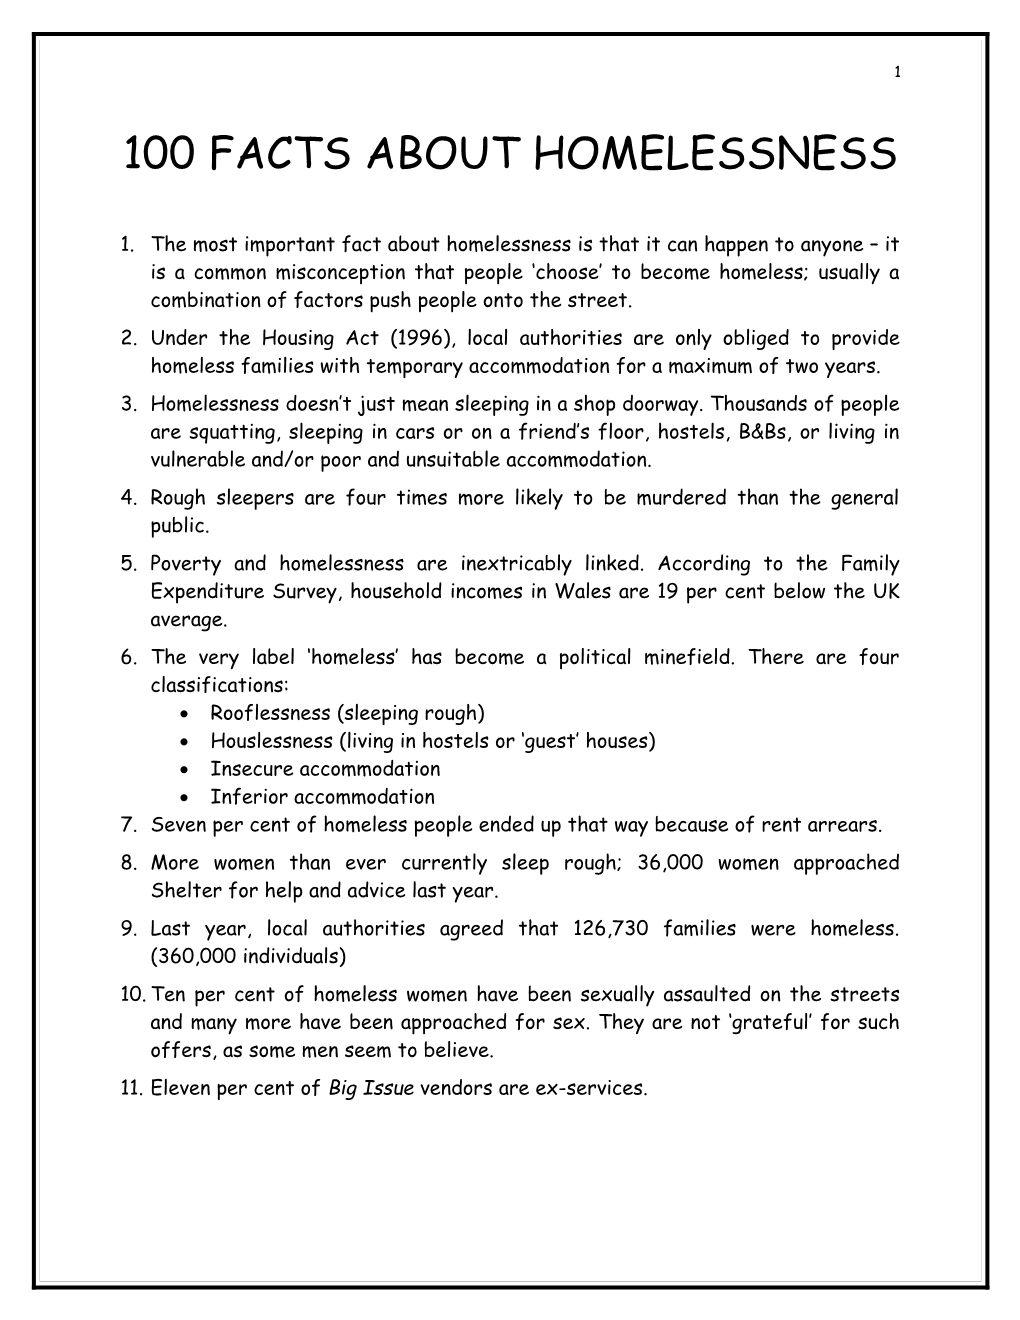 100 Facts About Homlessness